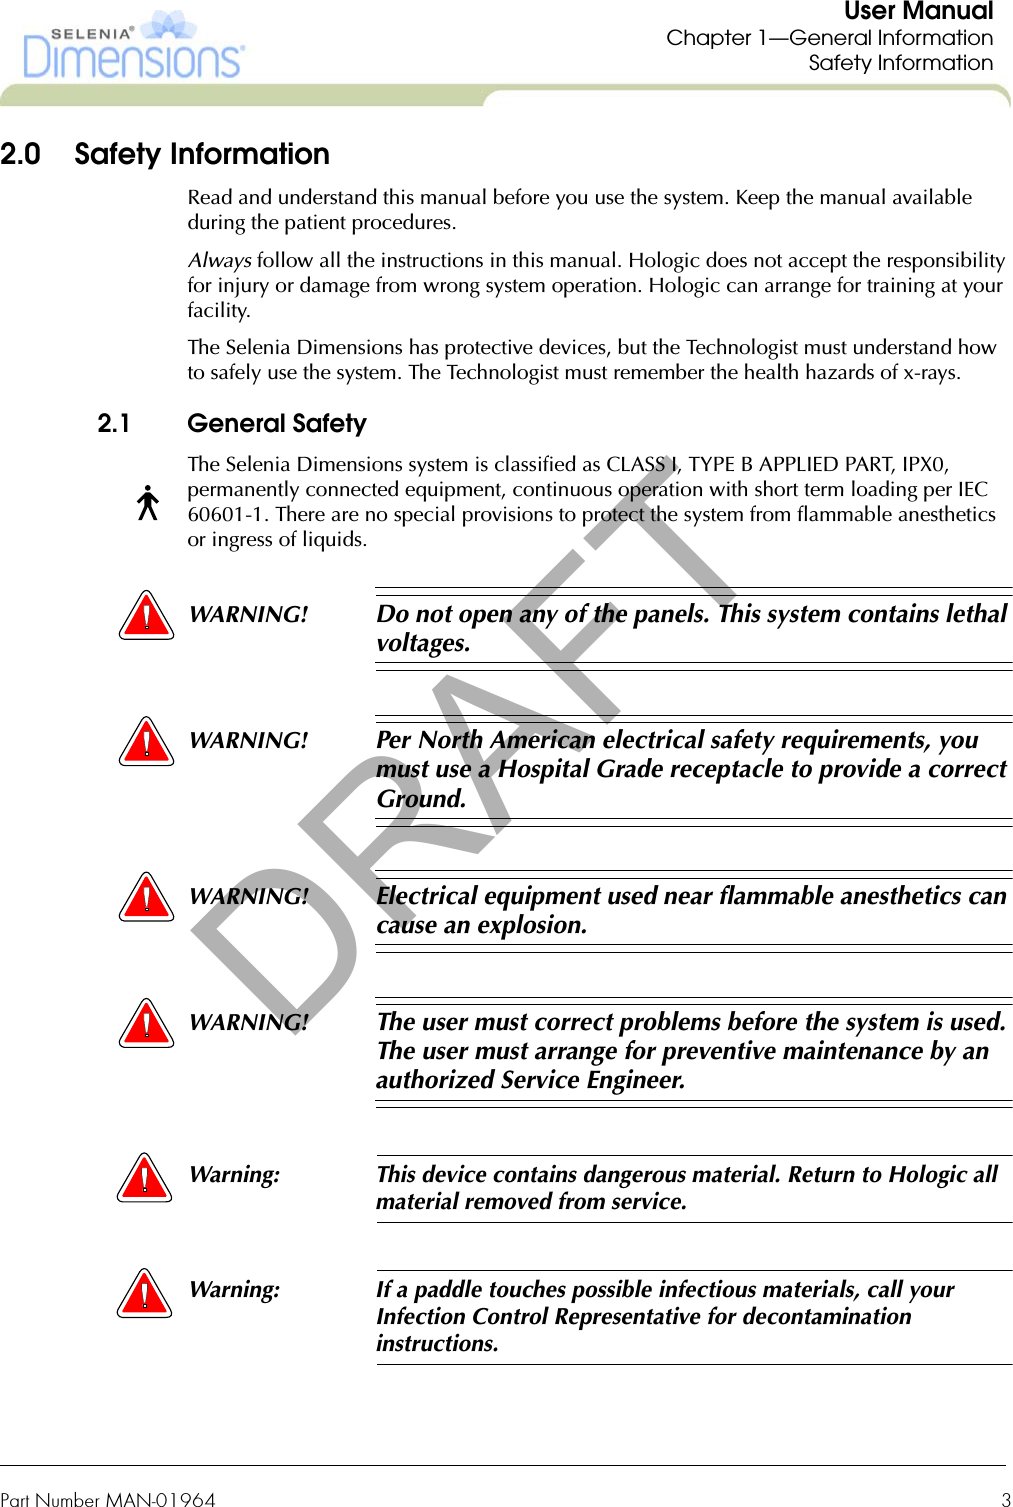 Part Number MAN-01964  3User ManualChapter 1—General InformationSafety Information2.0 Safety InformationRead and understand this manual before you use the system. Keep the manual available during the patient procedures.Always follow all the instructions in this manual. Hologic does not accept the responsibility for injury or damage from wrong system operation. Hologic can arrange for training at your facility.The Selenia Dimensions has protective devices, but the Technologist must understand how to safely use the system. The Technologist must remember the health hazards of x-rays.2.1 General SafetyThe Selenia Dimensions system is classified as CLASS I, TYPE B APPLIED PART, IPX0, permanently connected equipment, continuous operation with short term loading per IEC 60601-1. There are no special provisions to protect the system from flammable anesthetics or ingress of liquids.WARNING! Do not open any of the panels. This system contains lethal voltages.WARNING! Per North American electrical safety requirements, you must use a Hospital Grade receptacle to provide a correct Ground.WARNING! Electrical equipment used near flammable anesthetics can cause an explosion.WARNING! The user must correct problems before the system is used. The user must arrange for preventive maintenance by an authorized Service Engineer.Warning: This device contains dangerous material. Return to Hologic all material removed from service.Warning: If a paddle touches possible infectious materials, call your Infection Control Representative for decontamination instructions.DRAFT